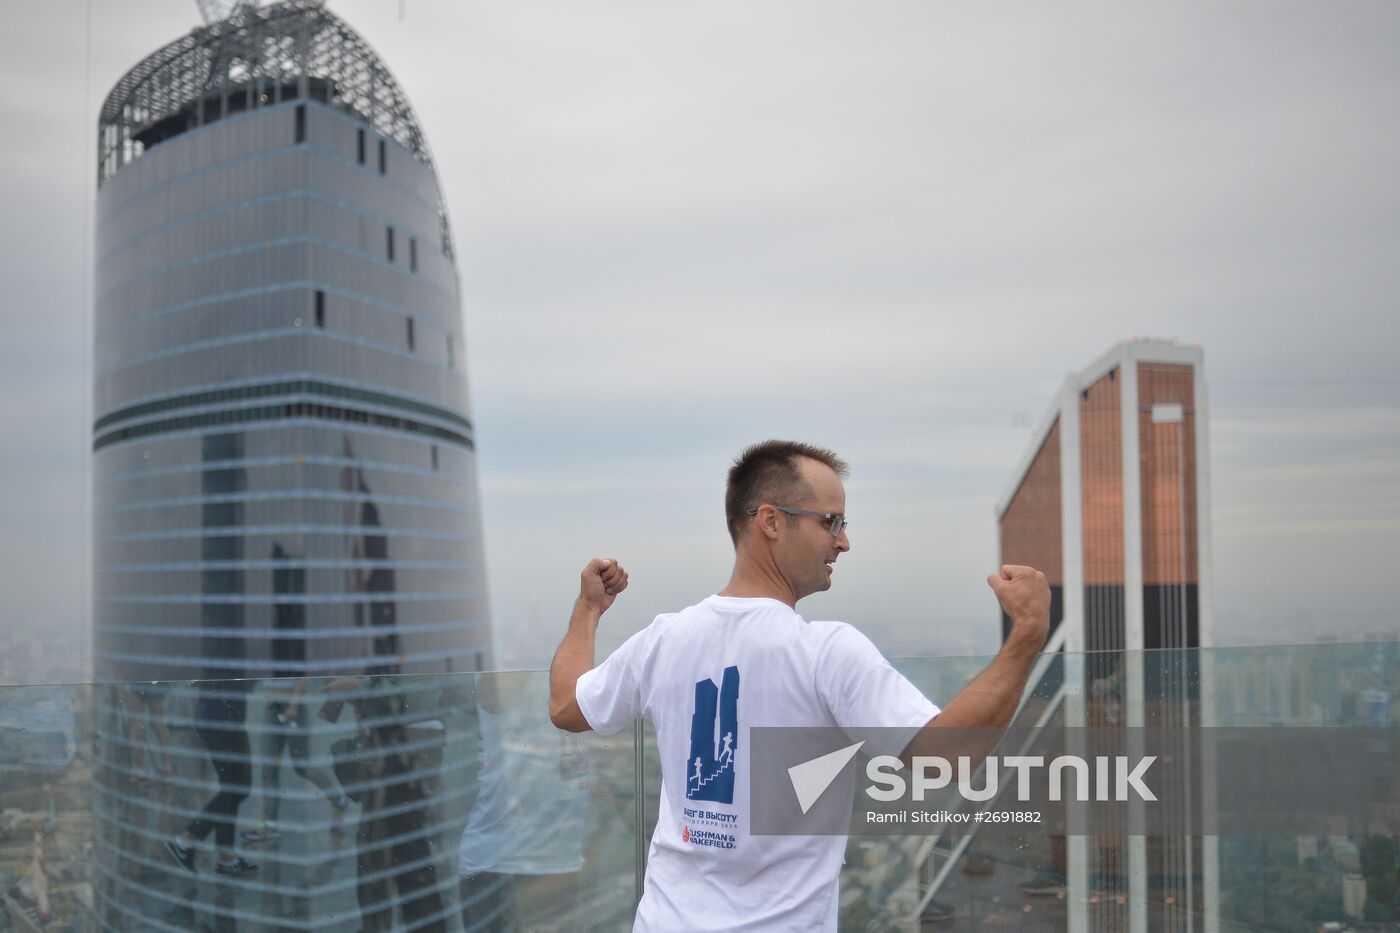 Running High charity race to top of Capital City skyscraper